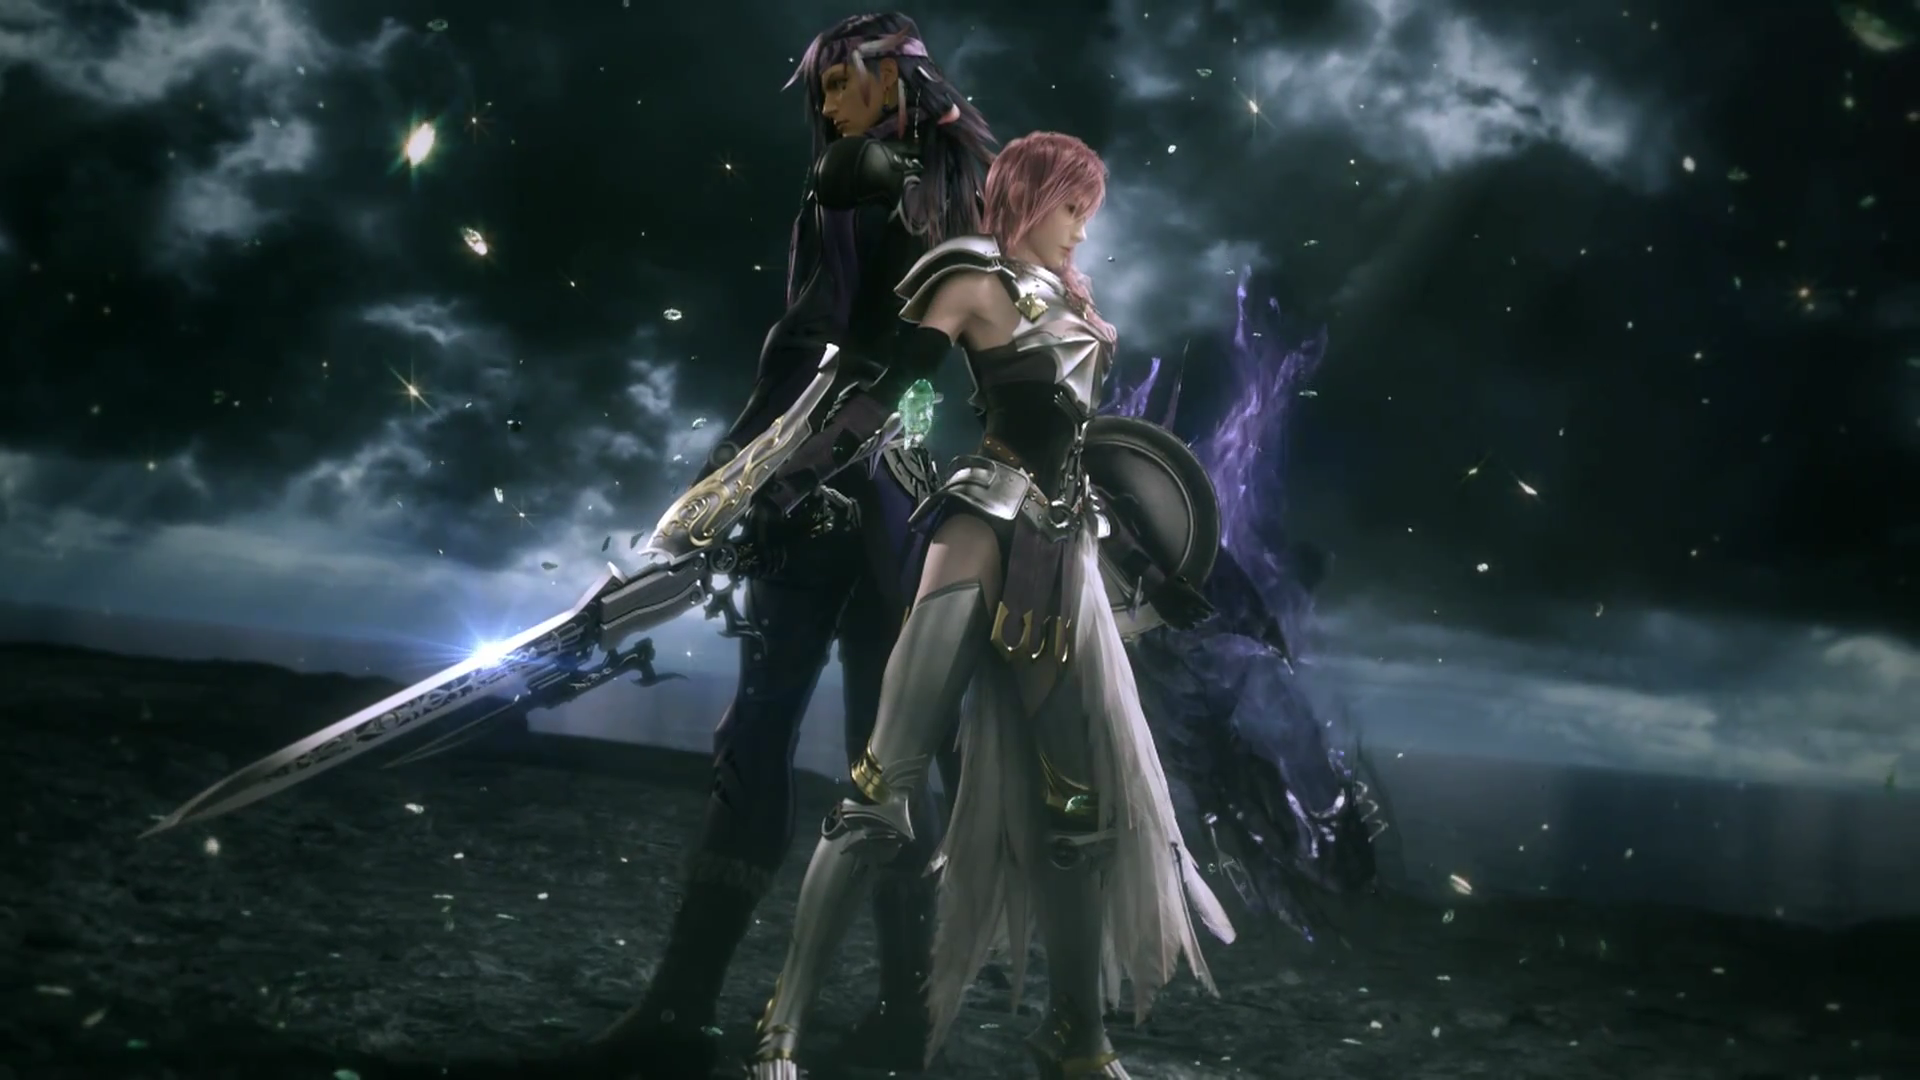 Free Download Final Fantasy Wallpapers Hd 1920x1080 For Your Desktop Mobile Tablet Explore 77 Ff Wallpaper Ffxiii Wallpaper Ffxi Wallpaper Lightning Ff Wallpaper